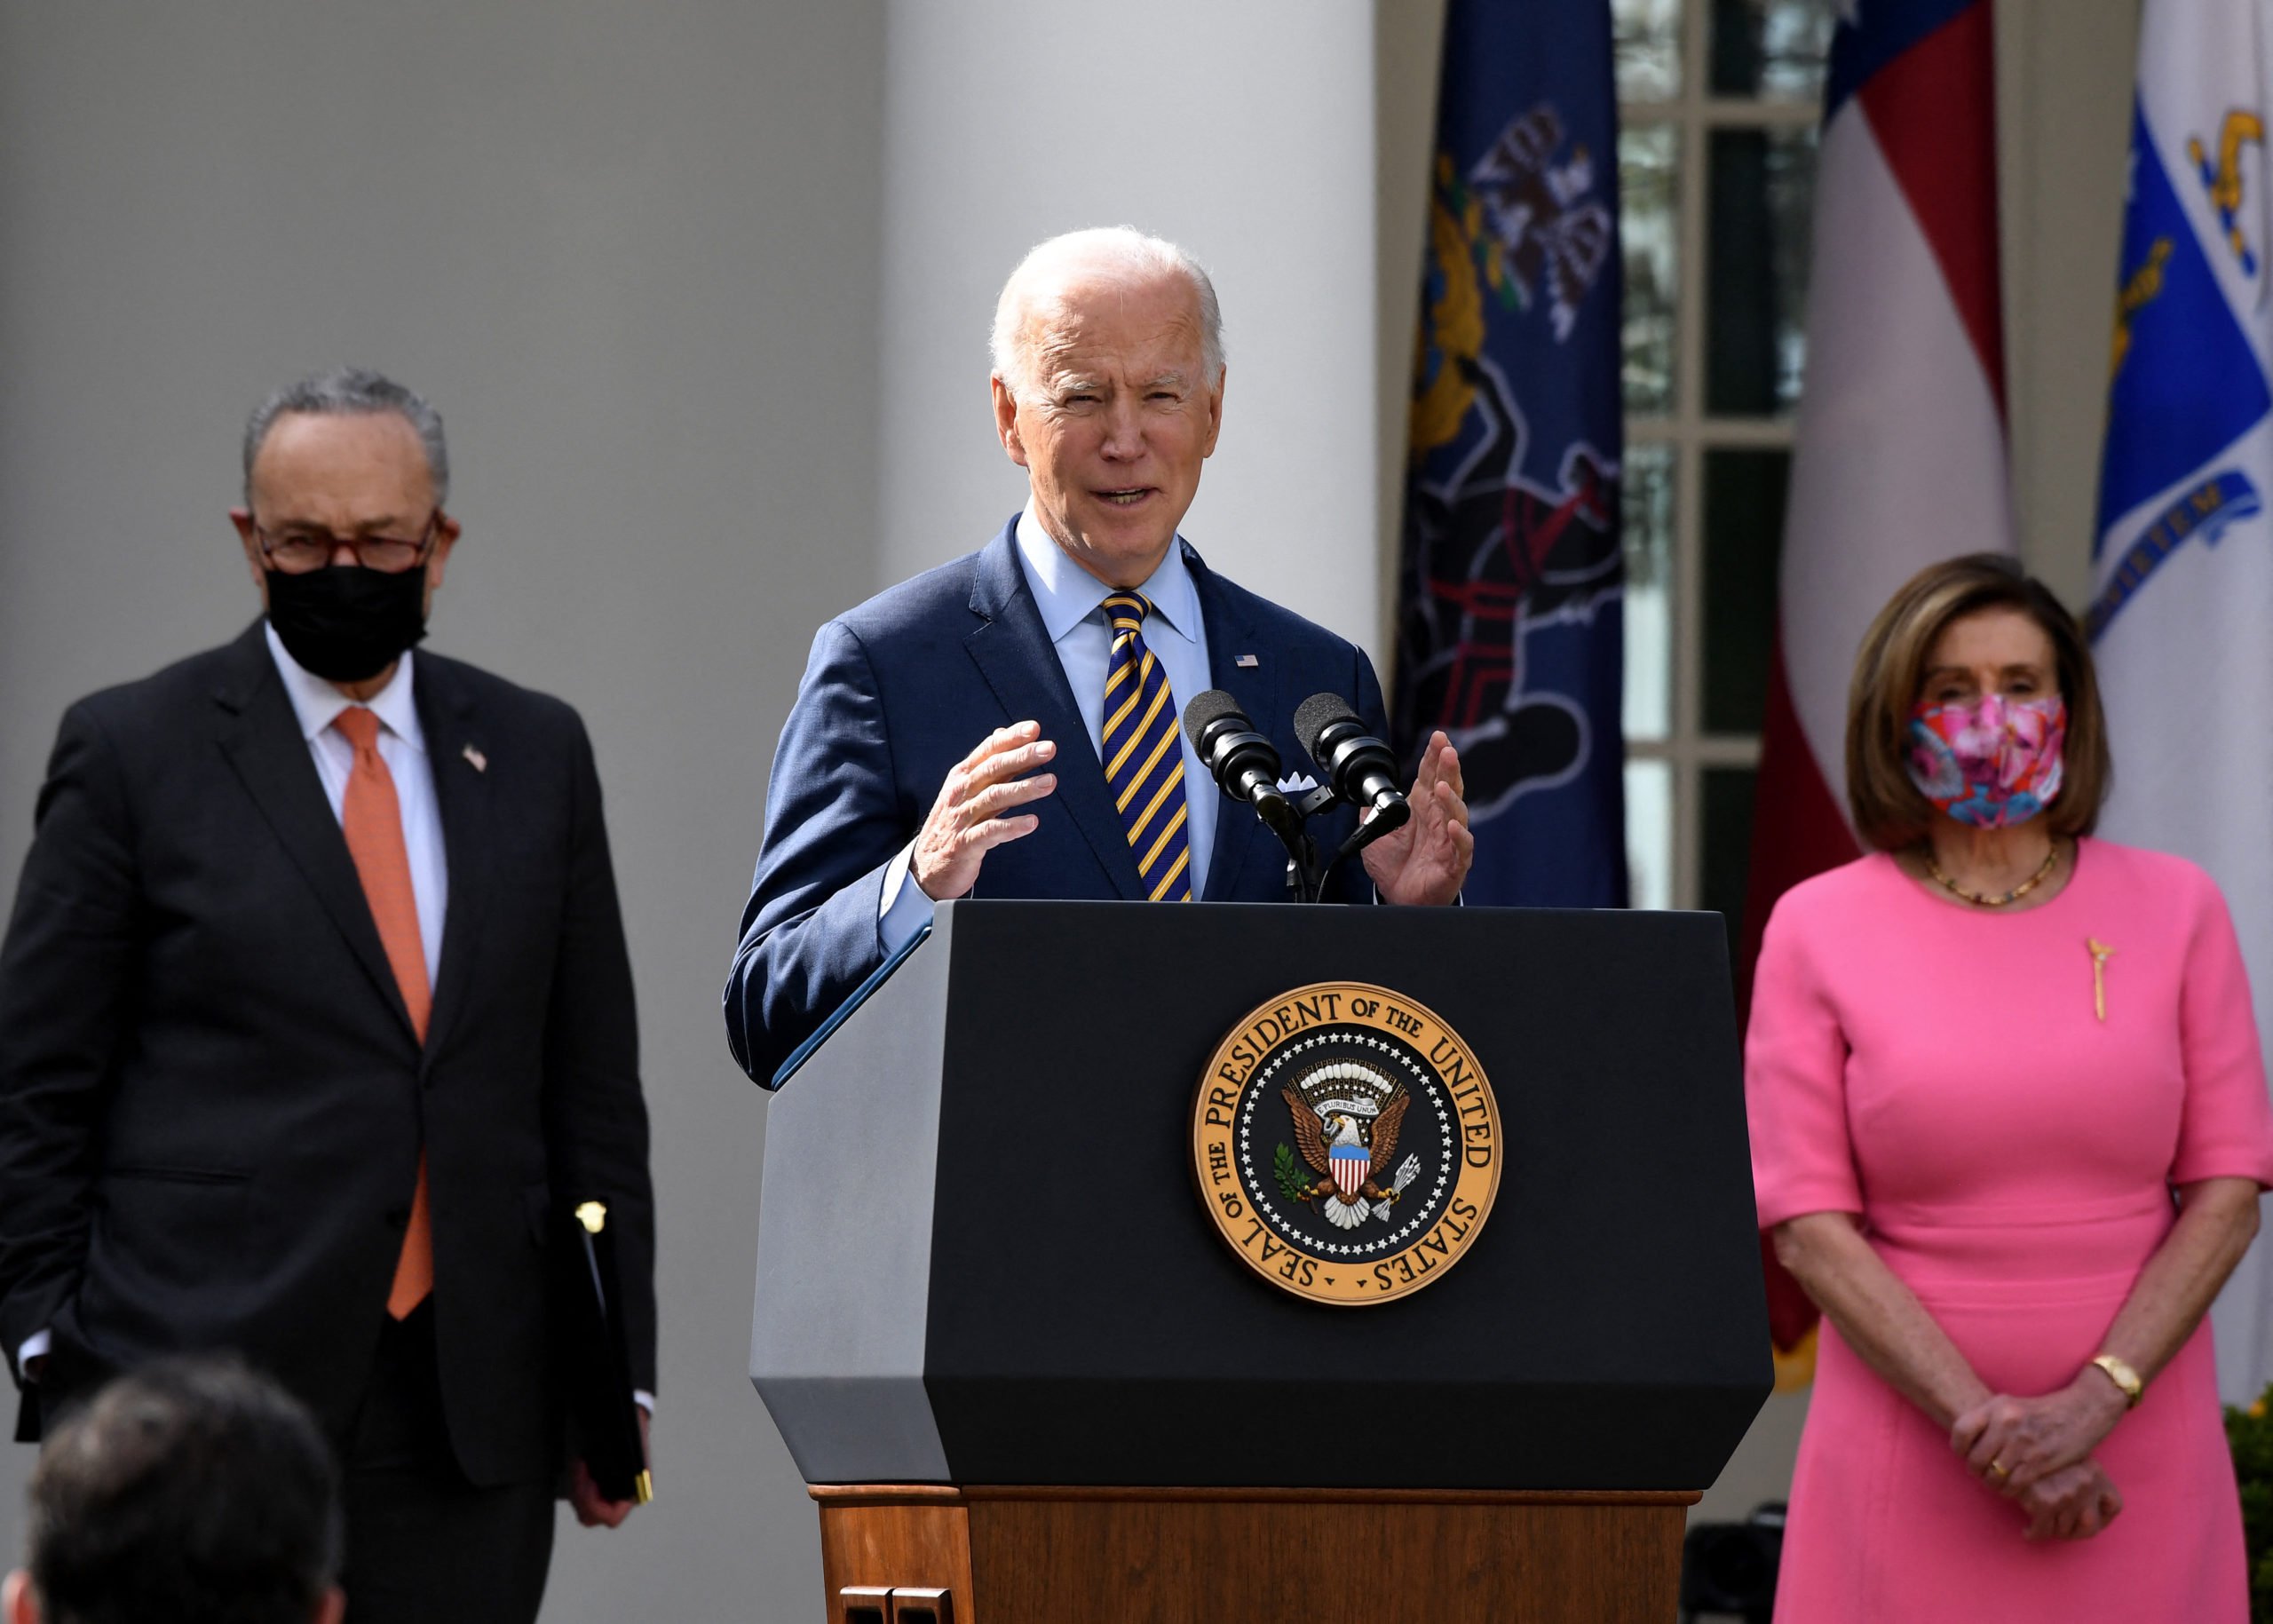 US President Joe Biden, with (L-R) Senate Majority Leader Chuck Schumer, Democrat of New York, and House Speaker Nancy Pelosi, Democrat of California, speaks about the American Rescue Plan in the Rose Garden of the White House in Washington, DC, on March 12, 2021. (Photo by OLIVIER DOULIERY / AFP) (Photo by OLIVIER DOULIERY/AFP via Getty Images)